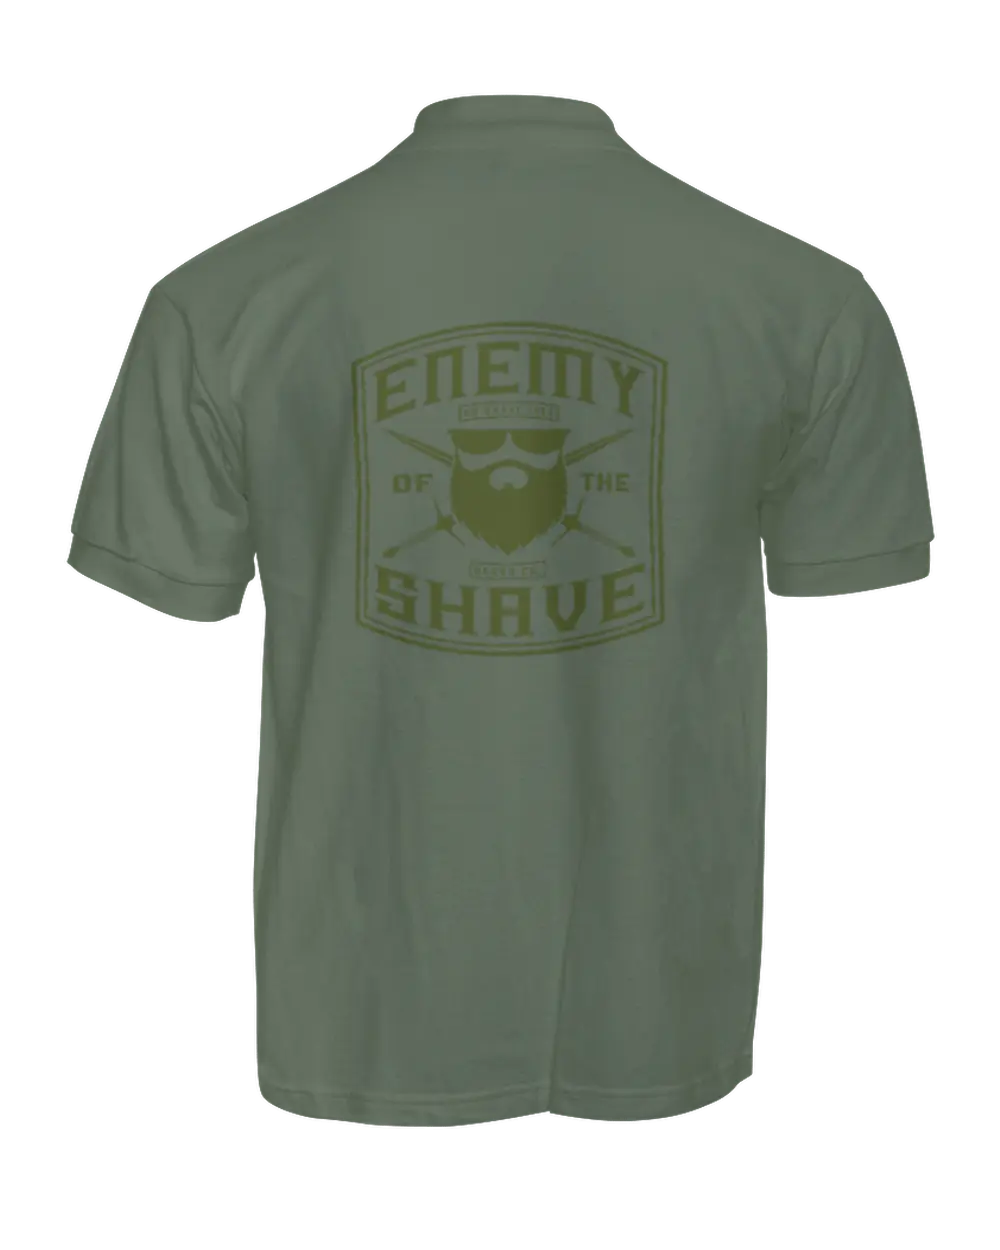 ENEMY OF THE SHAVE  Military Green T-Shirt